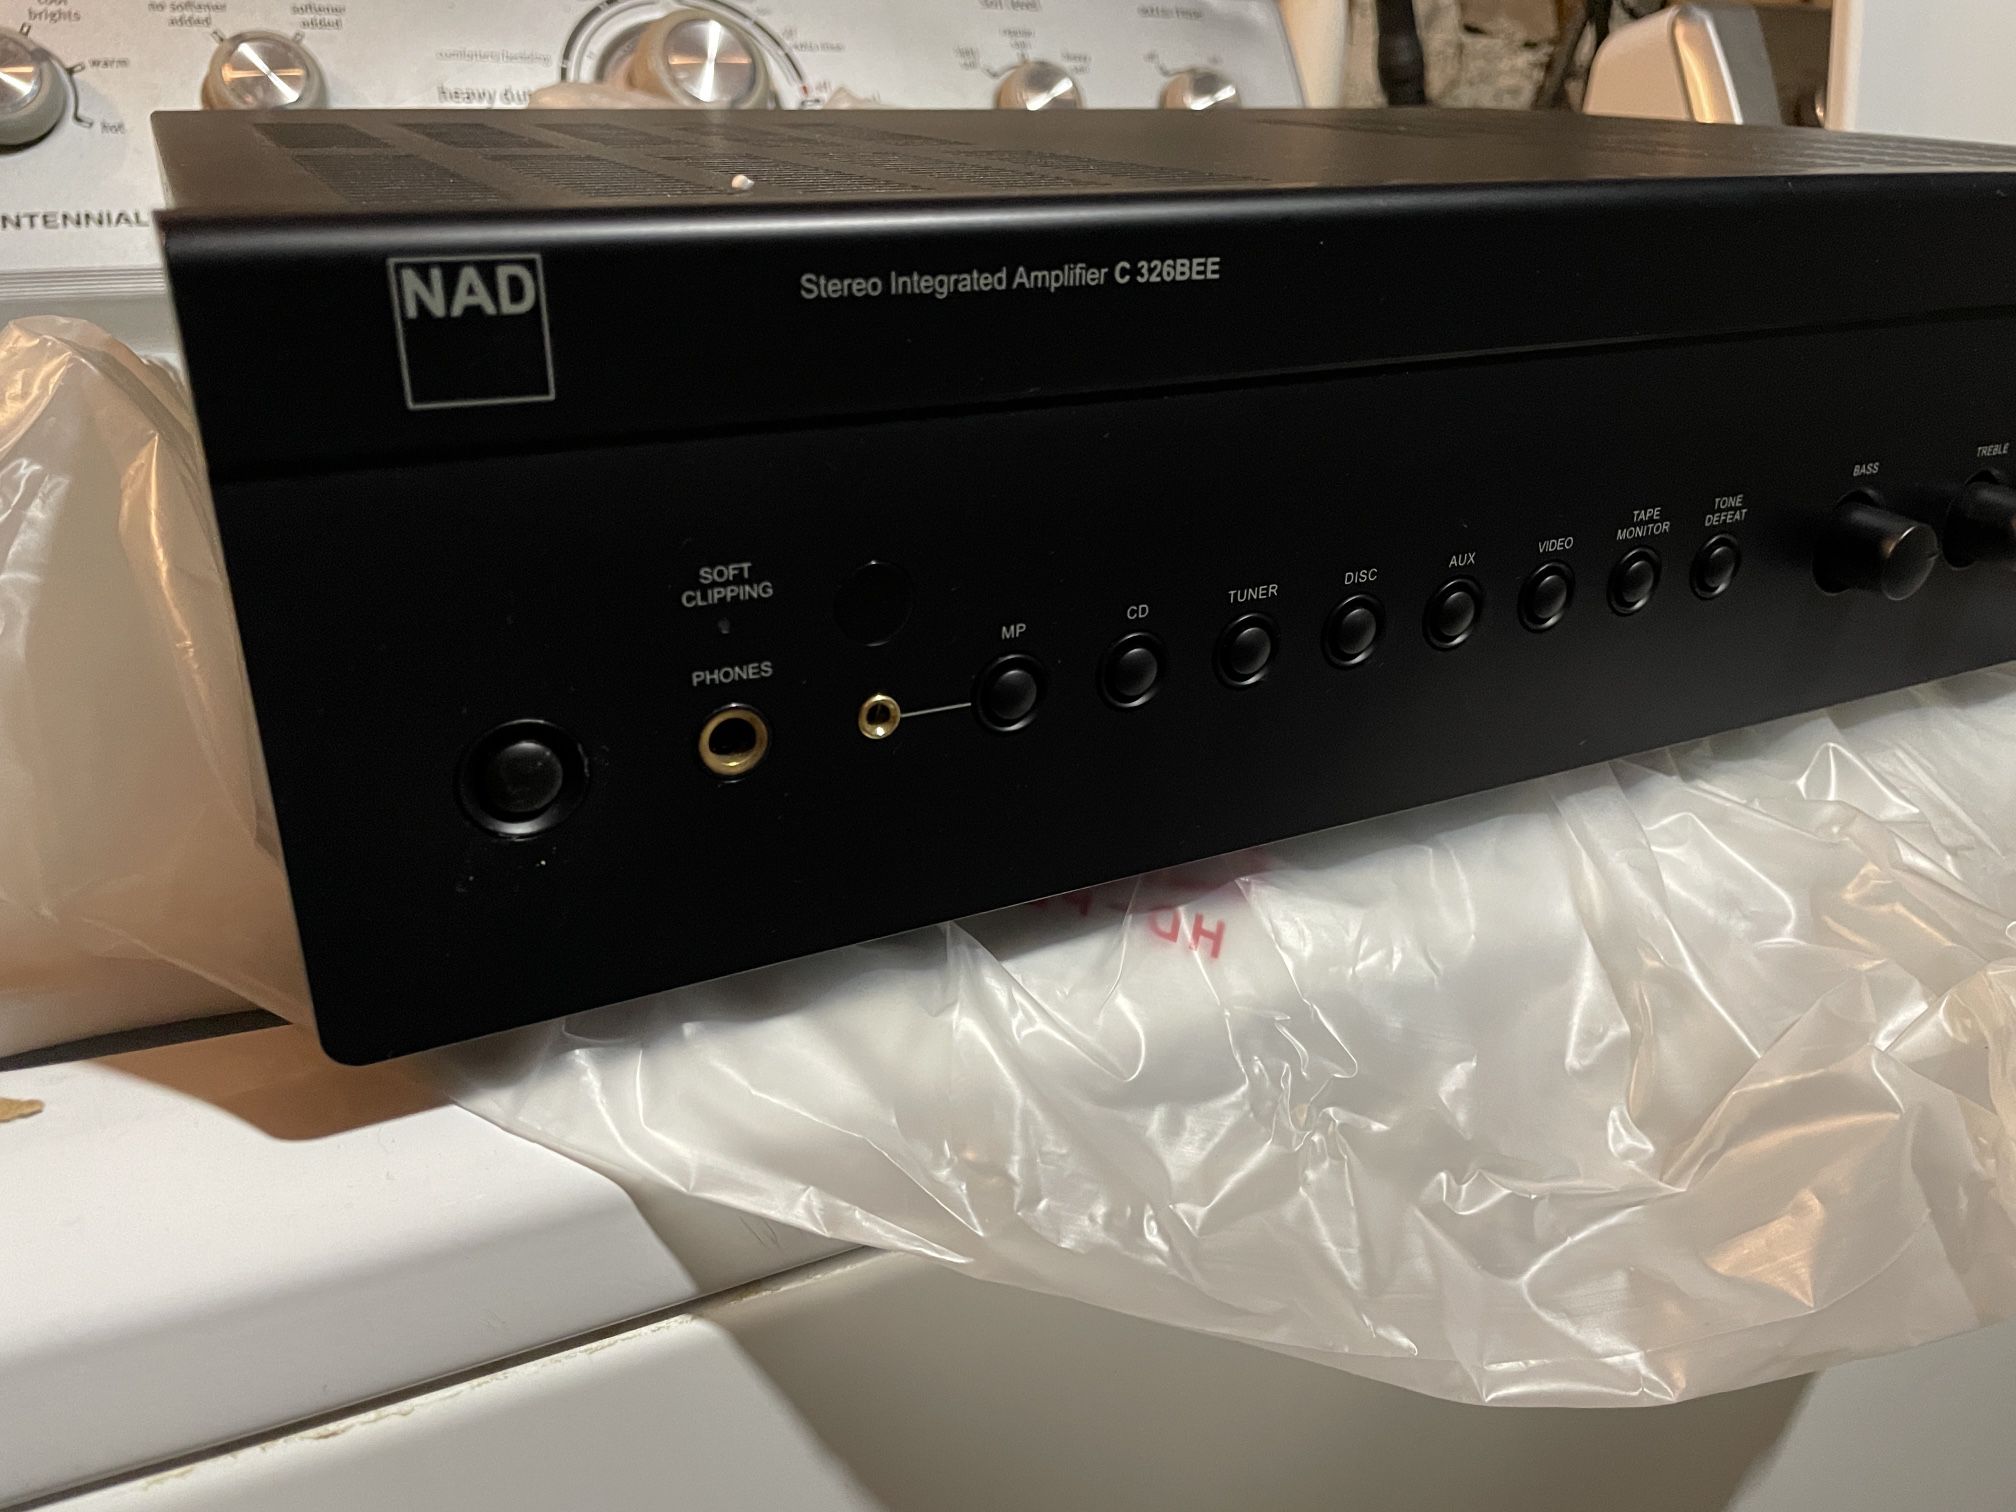 NAD C326BEE Stereo Integrated Amplifier with Remote and instruction manual